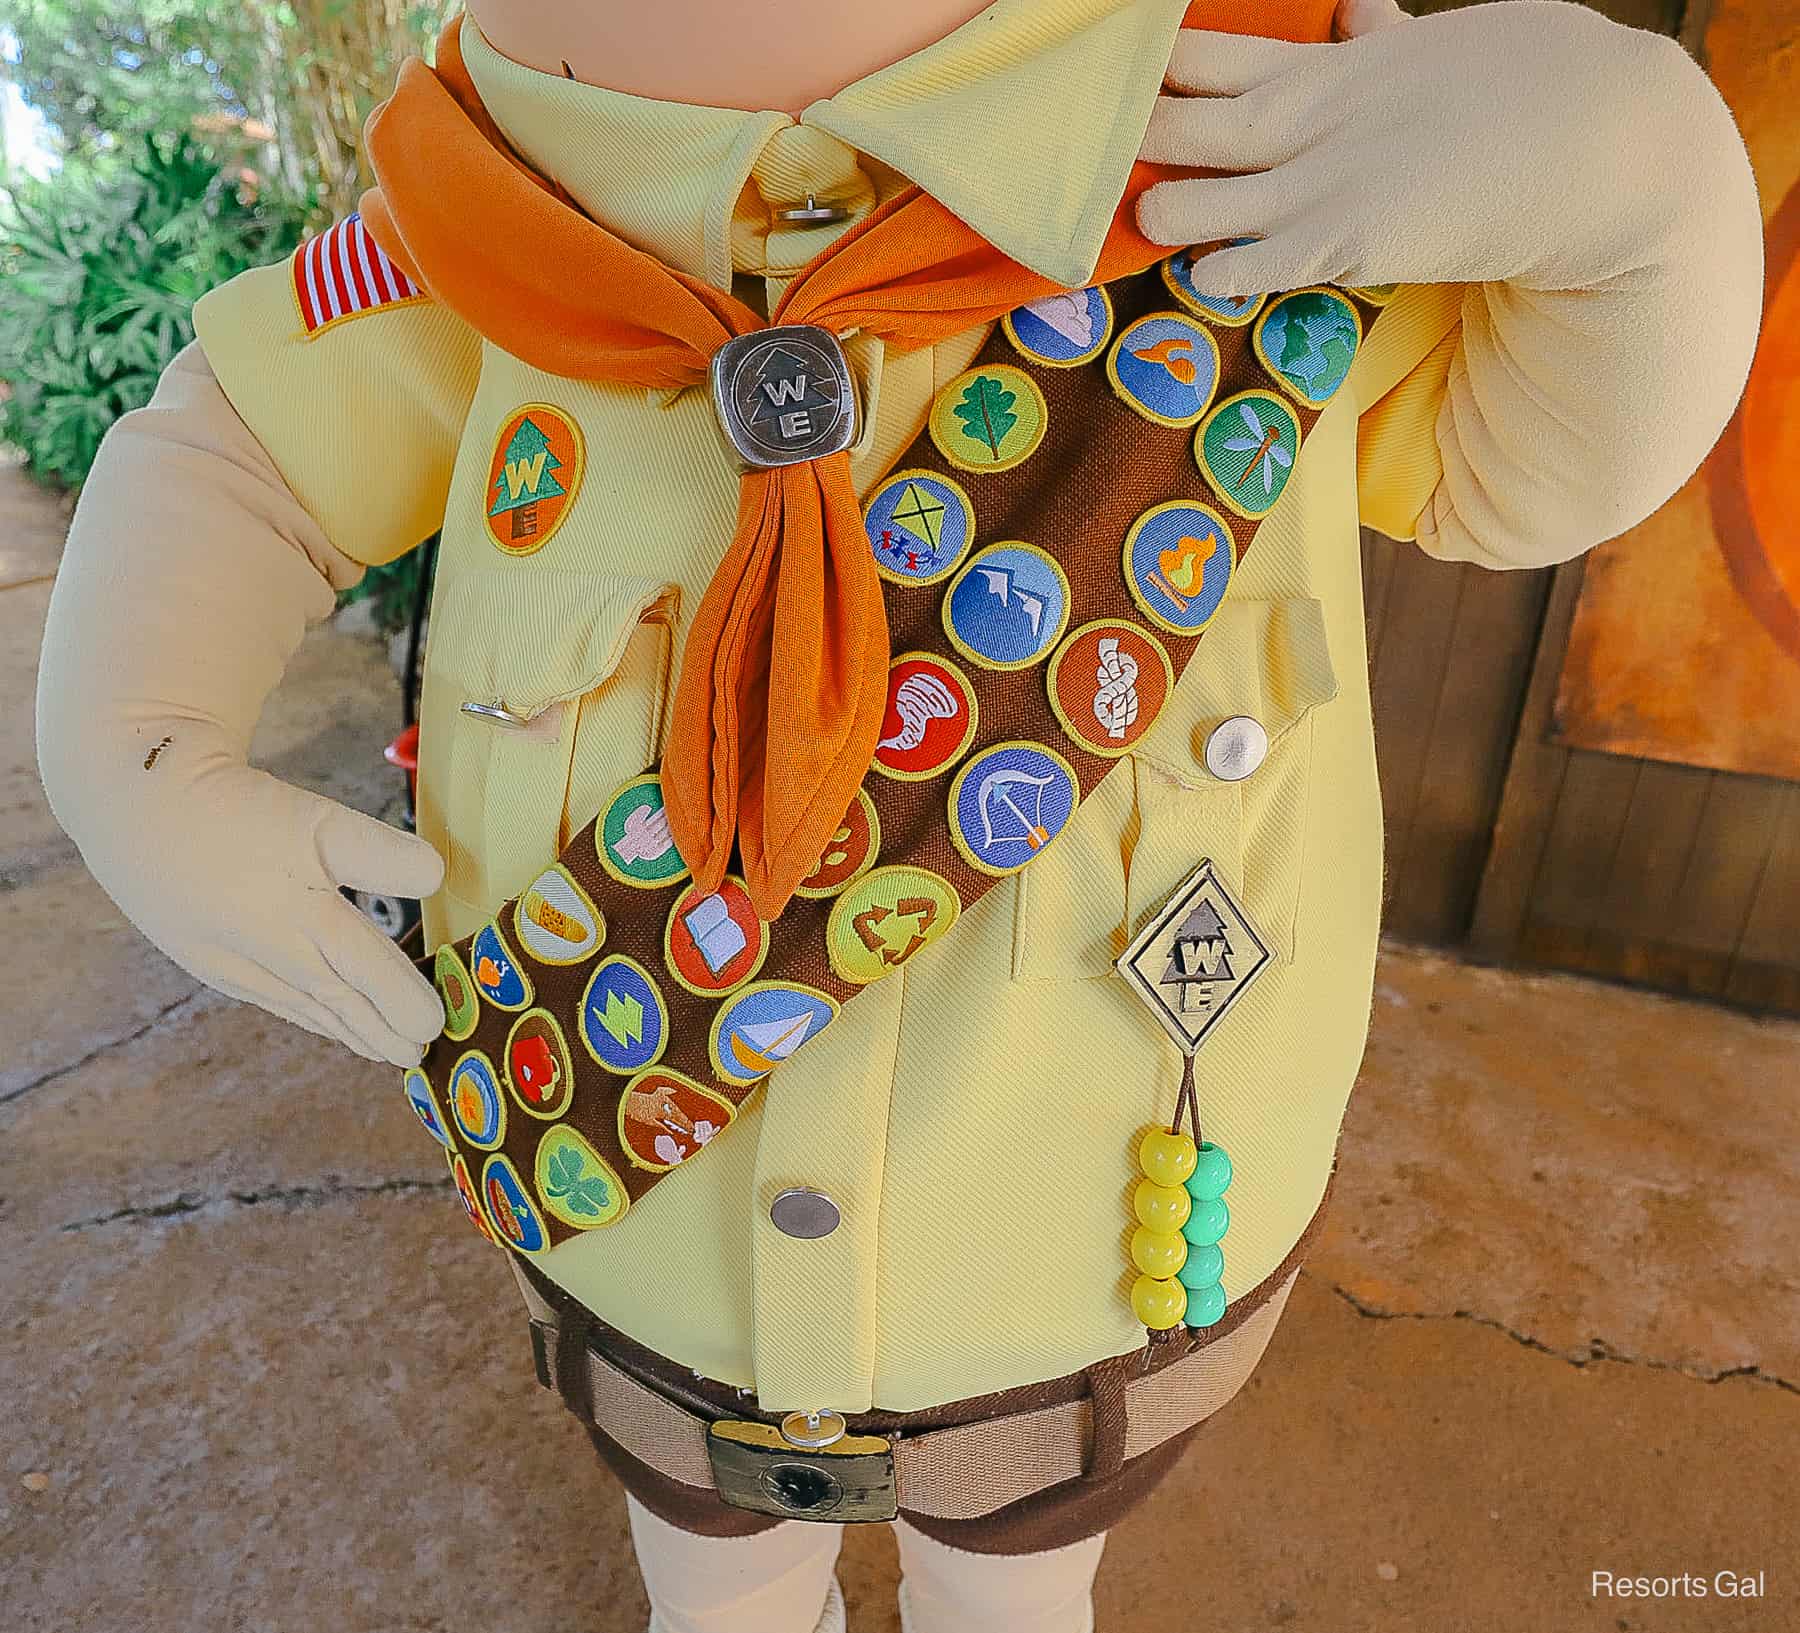 Russell shows off his decorative sash of Wilderness Explorer badges 